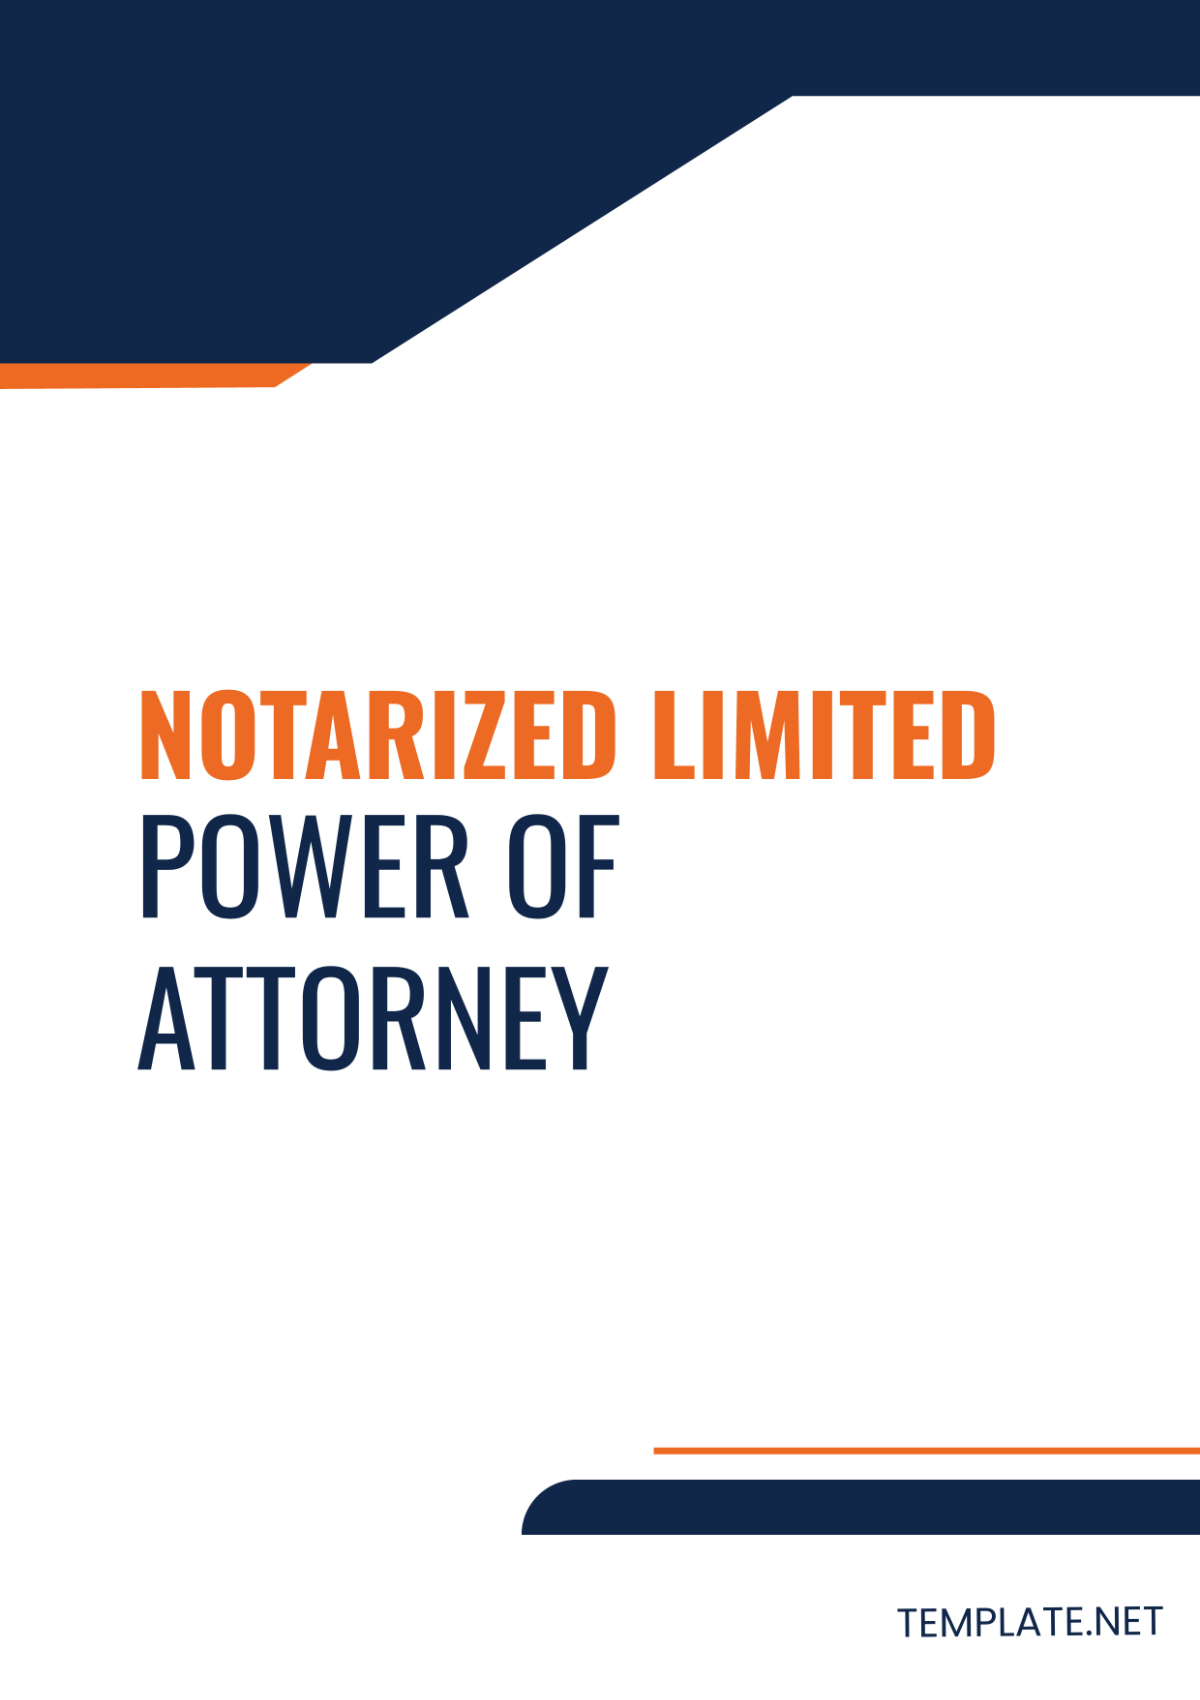 Notarized Limited Power of Attorney Template